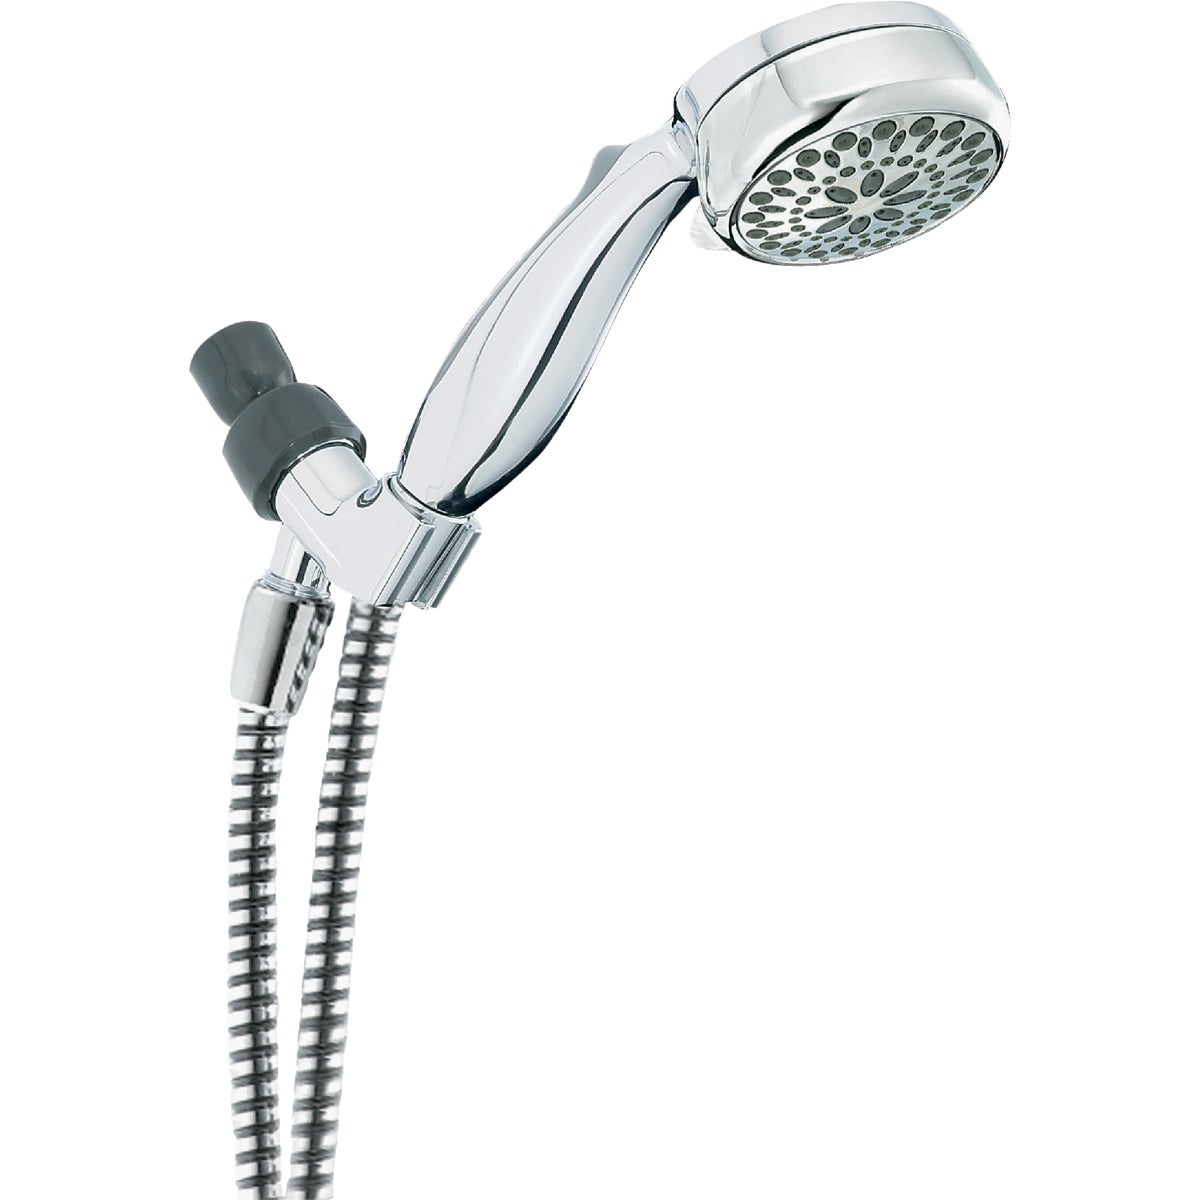 Item 404113, SpotShield Technology helps the shower head and hand shower stay cleaner, 